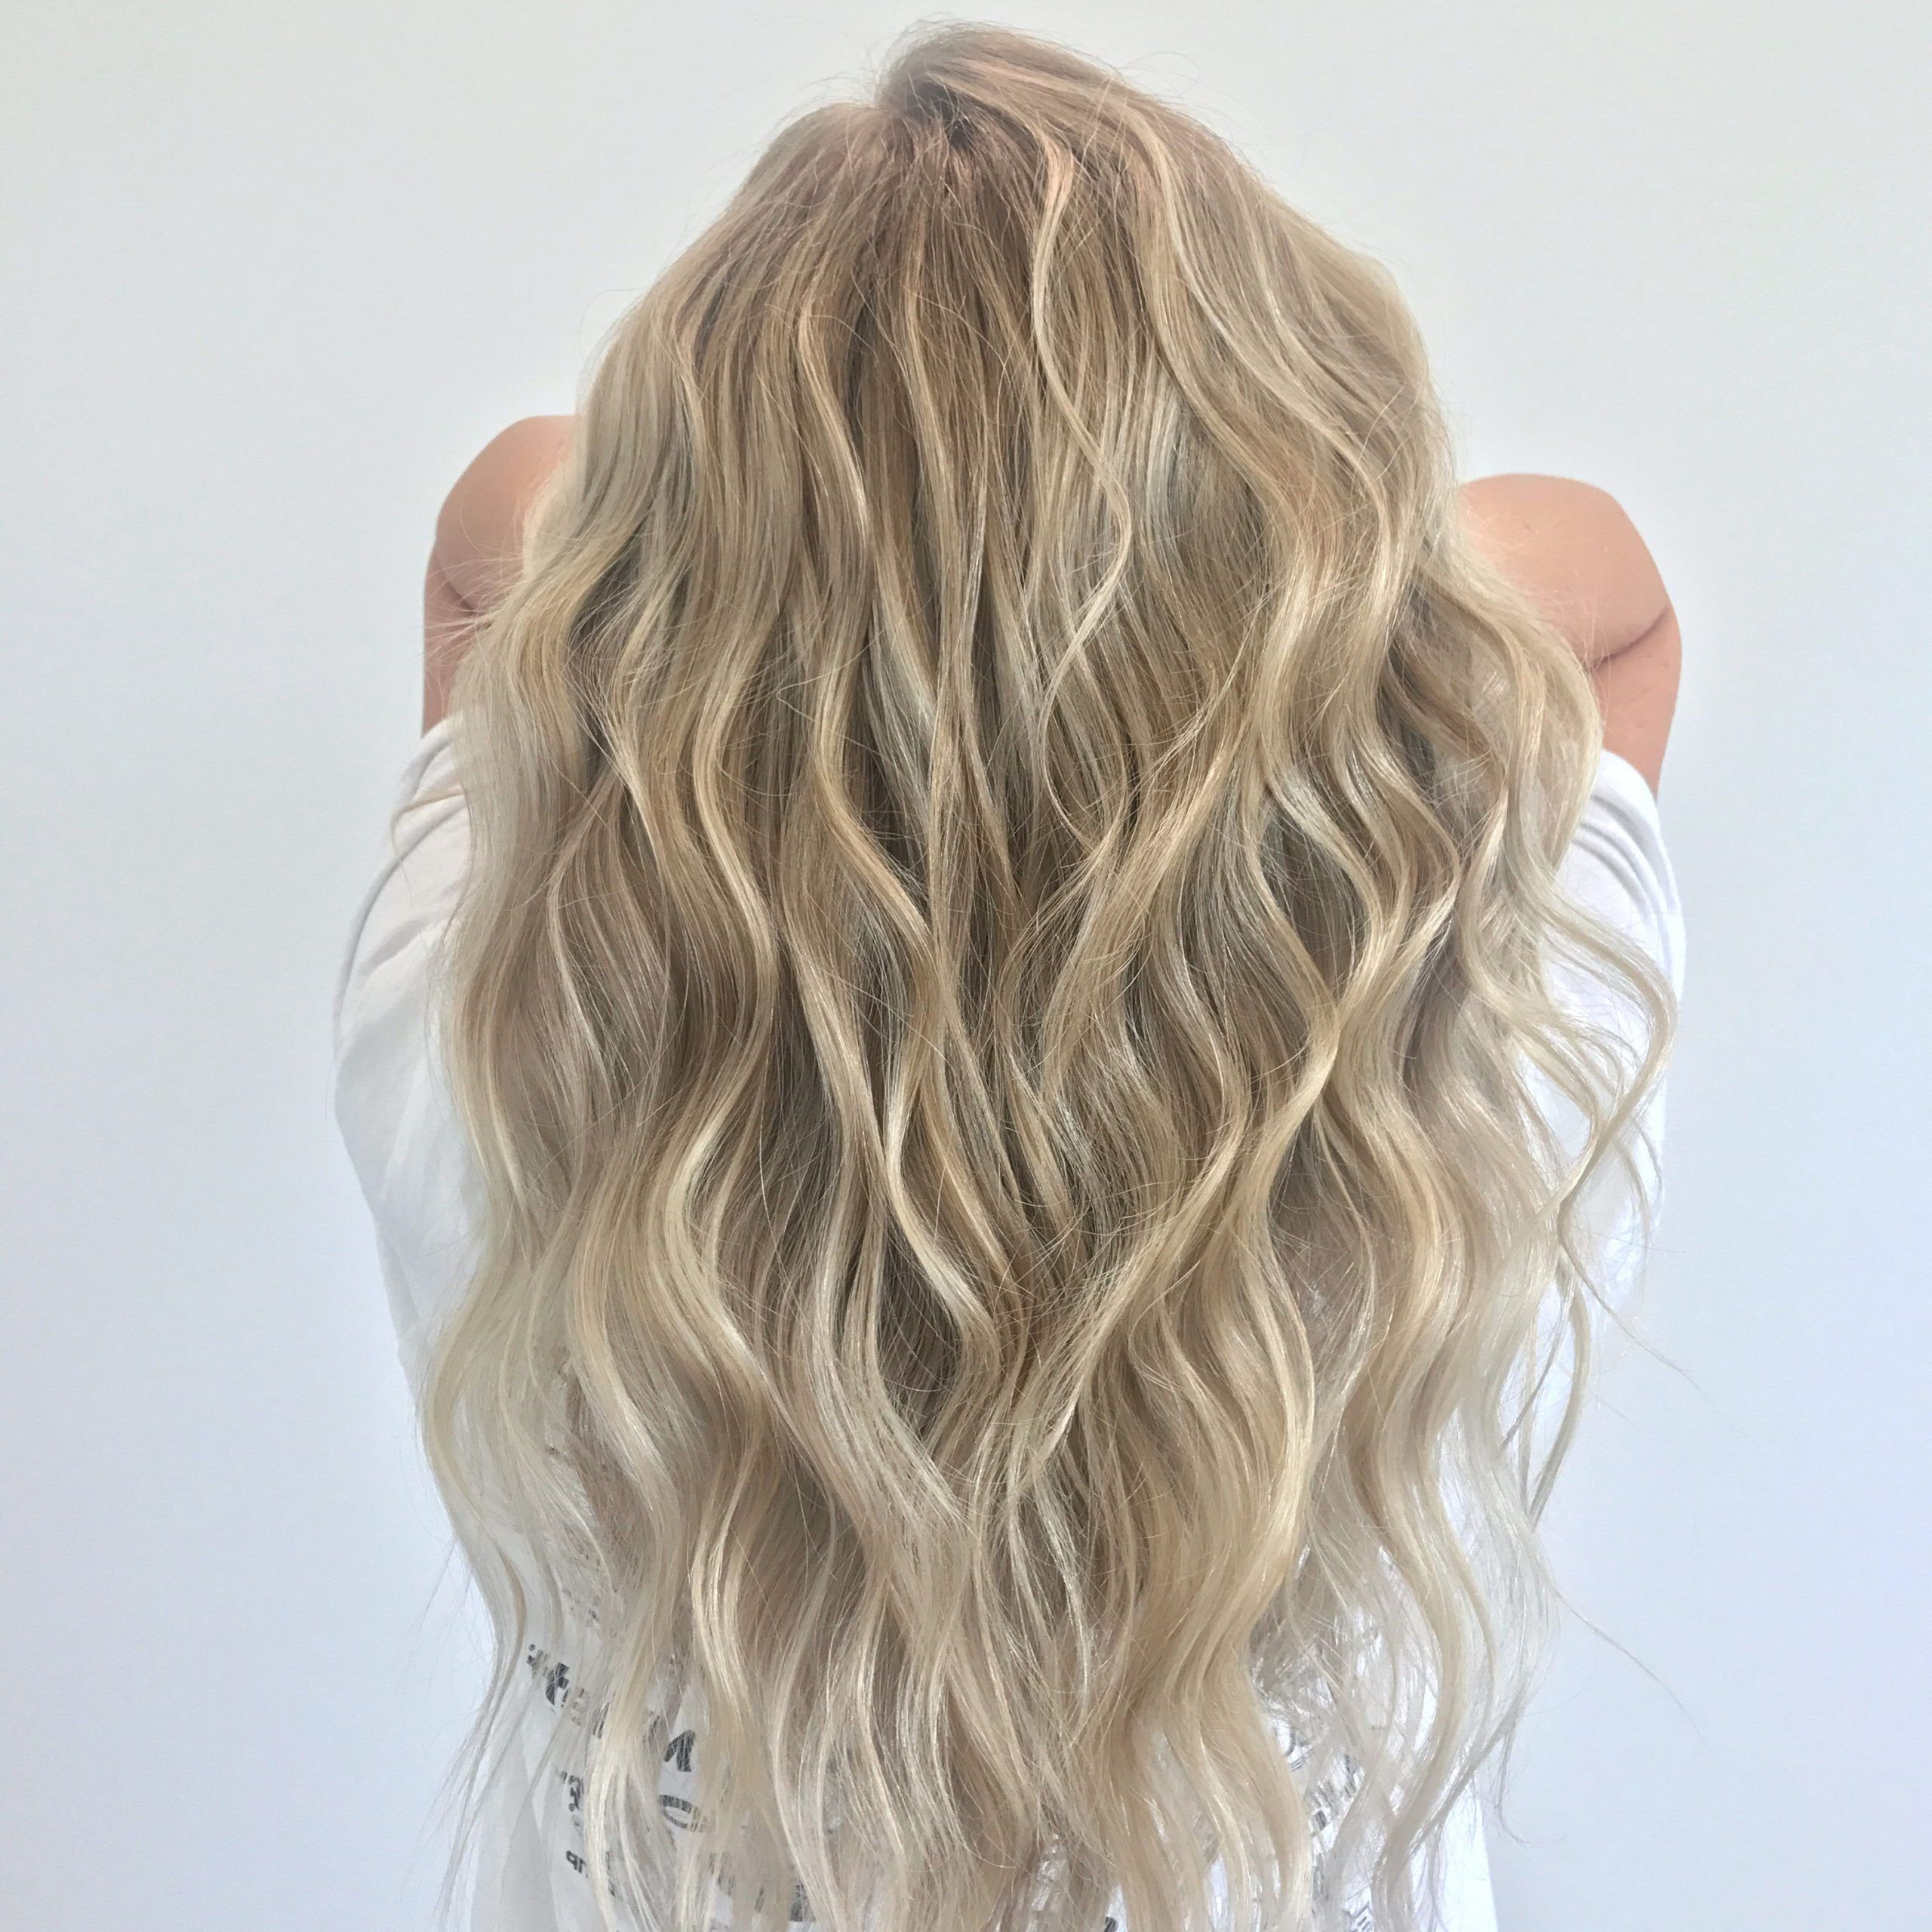 Platinum Blonde, Blonde Hair, Beach Waves, Long Hair, Balayage, Foilayage, Icy  Blonde, Hair Color Ideas | Long Hair Waves, Platinum Blonde, Beach Waves  Long Hair For Most Popular Icy Blonde Beach Waves Haircuts (View 19 of 25)